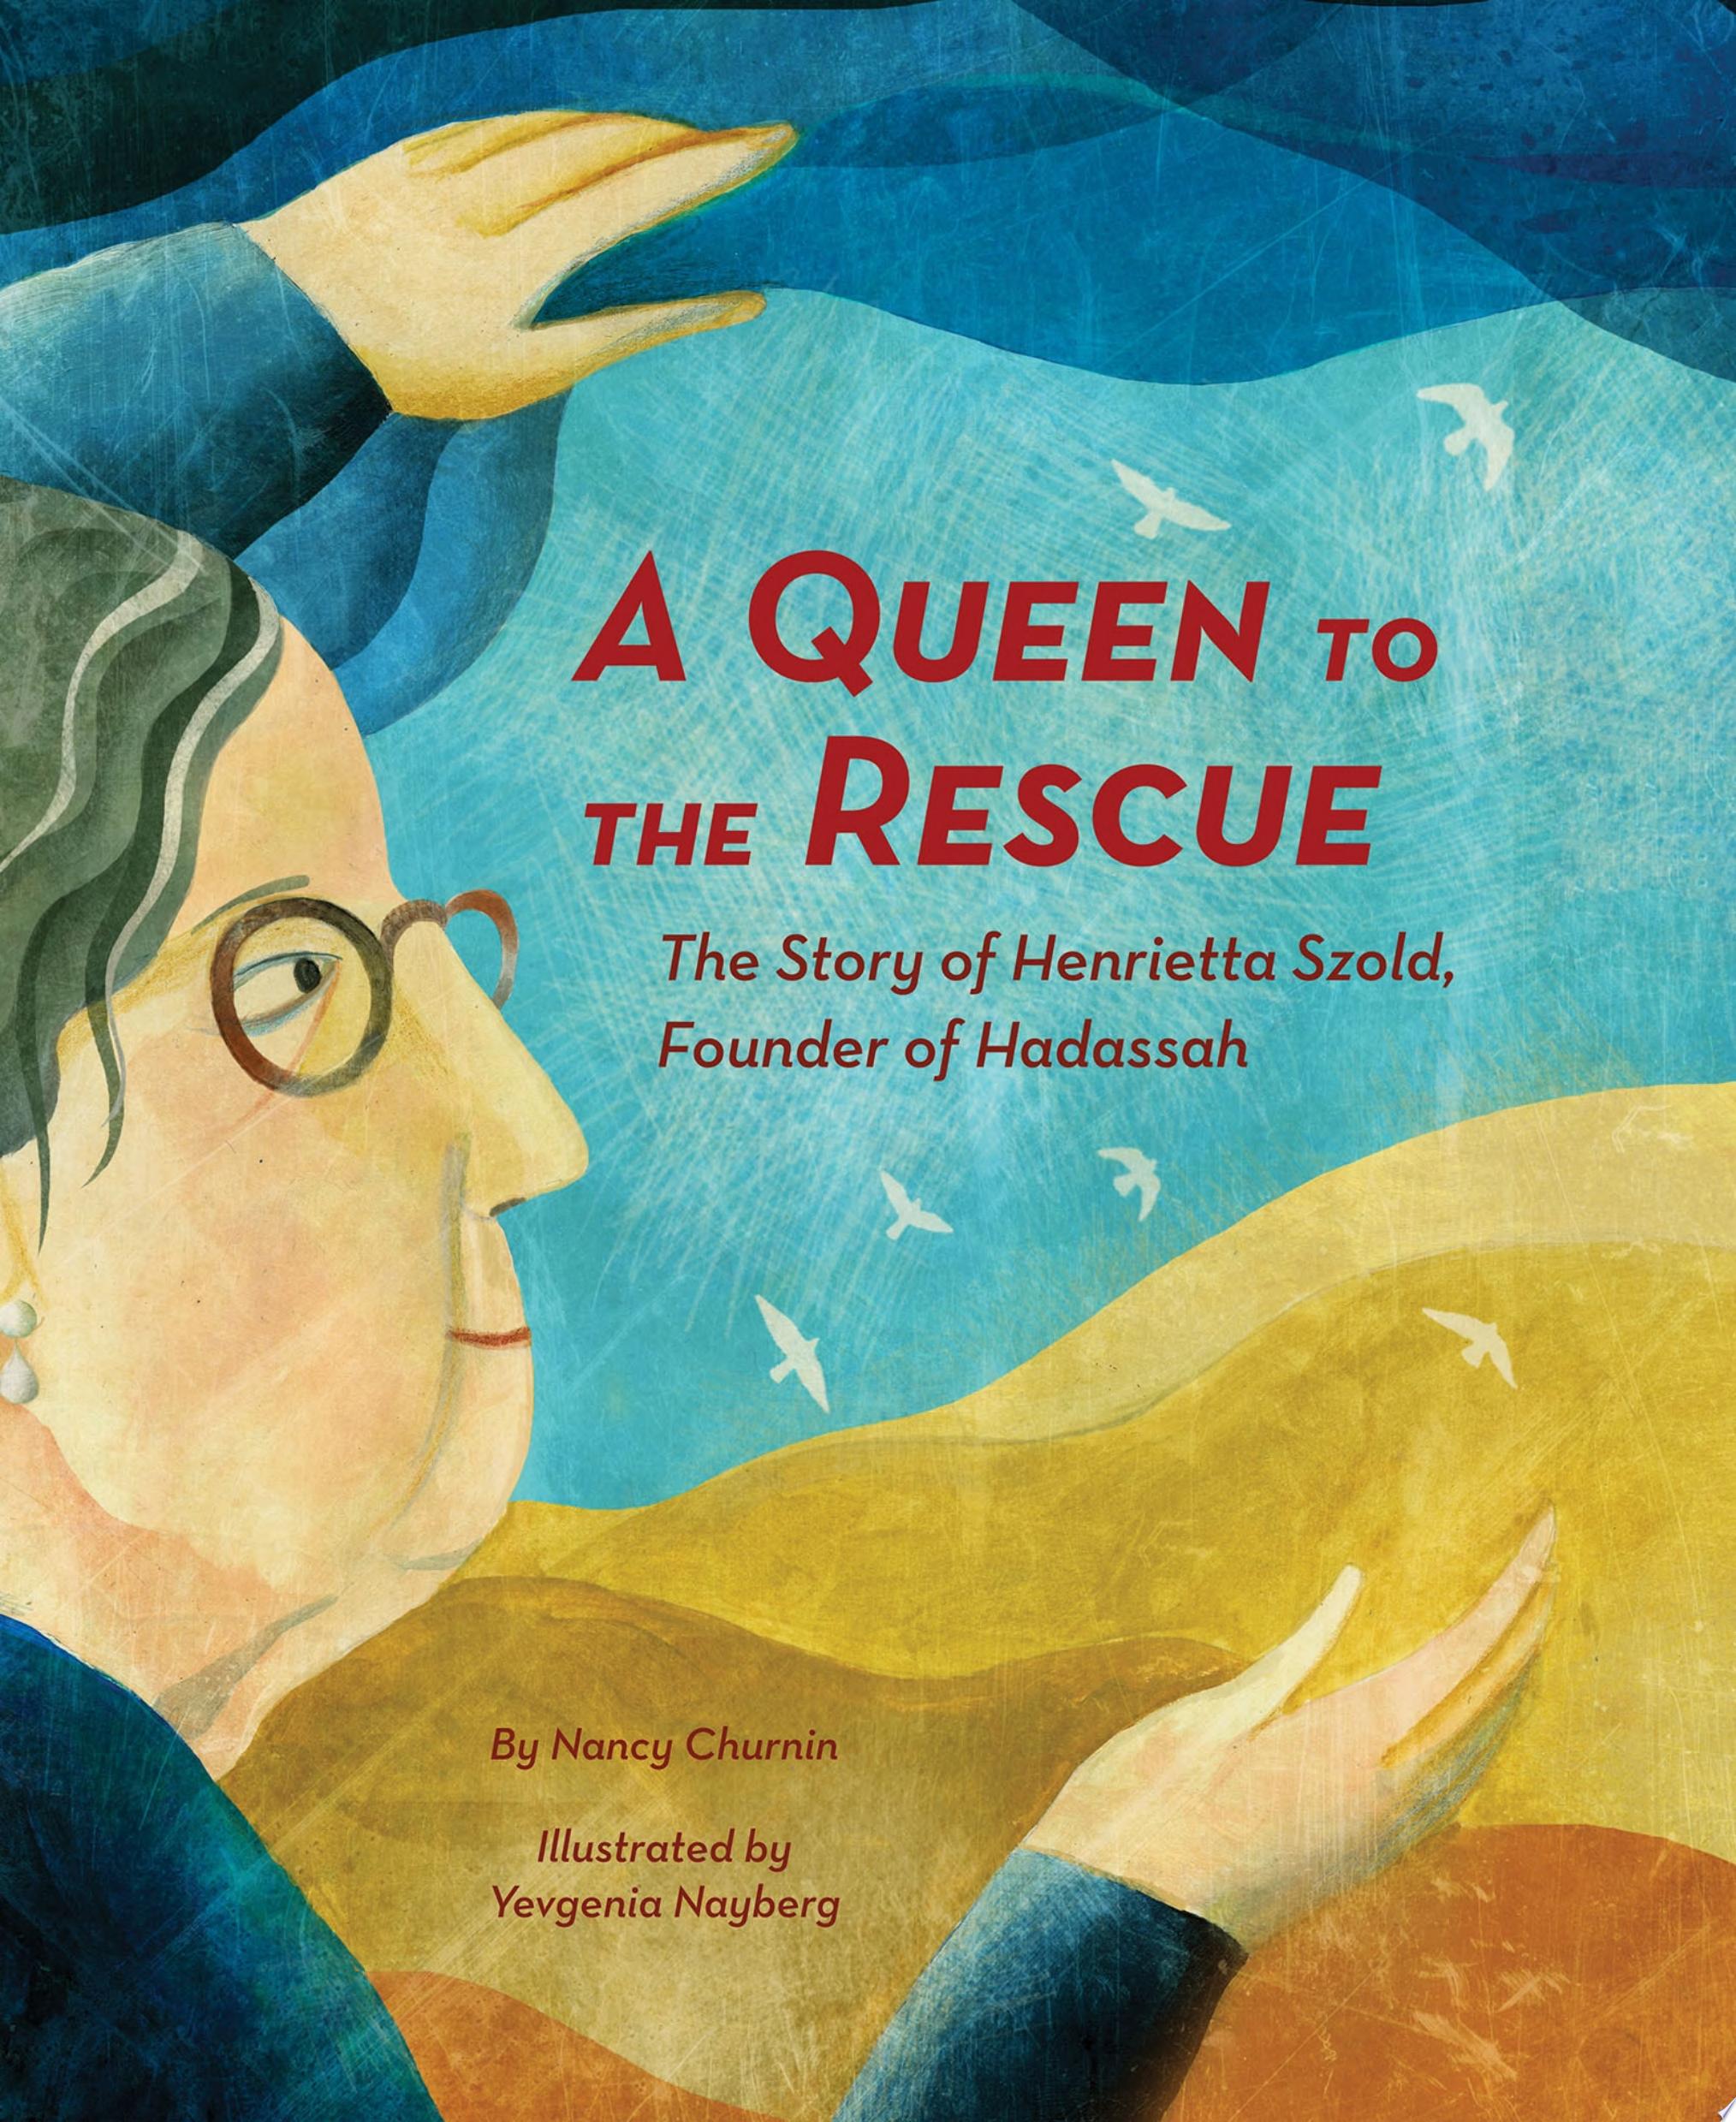 Image for "A Queen to the Rescue"